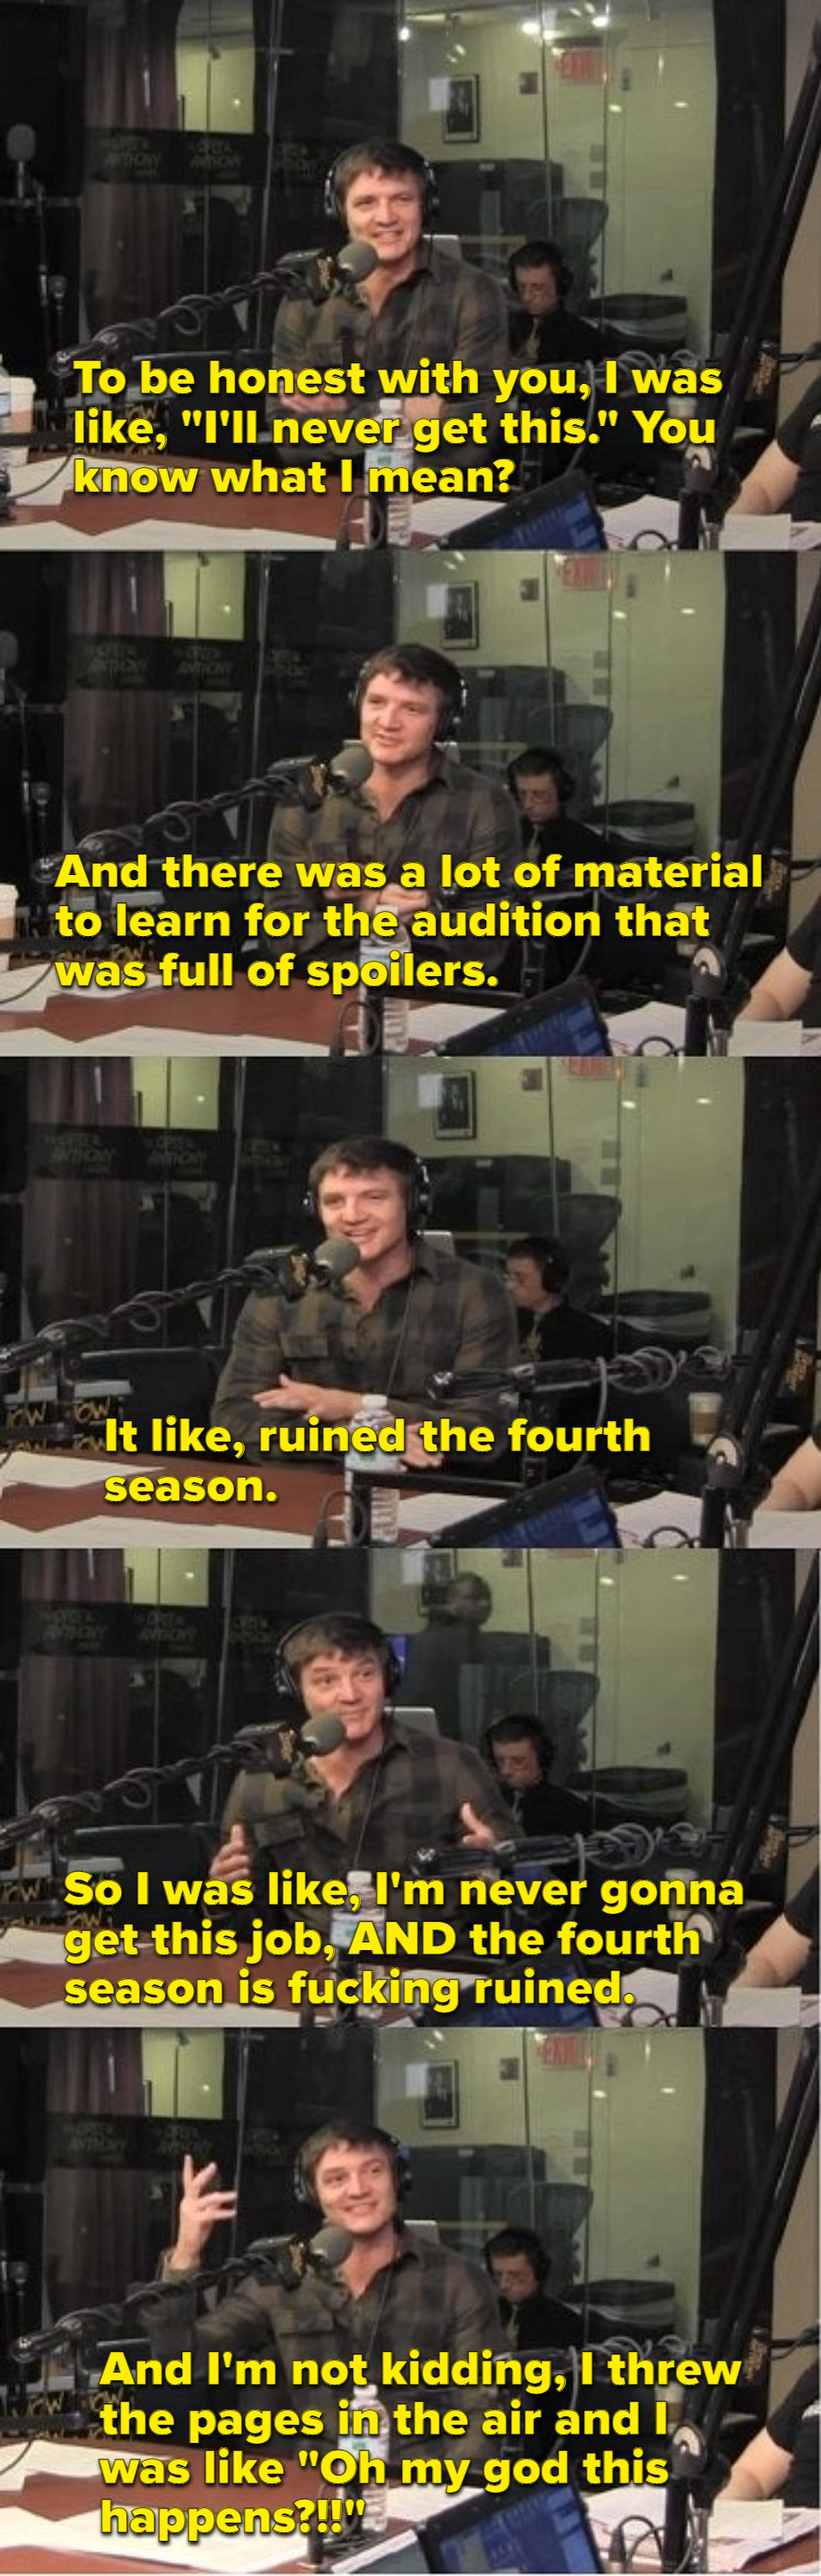 Pedro talking about his audition process for Game of Thrones